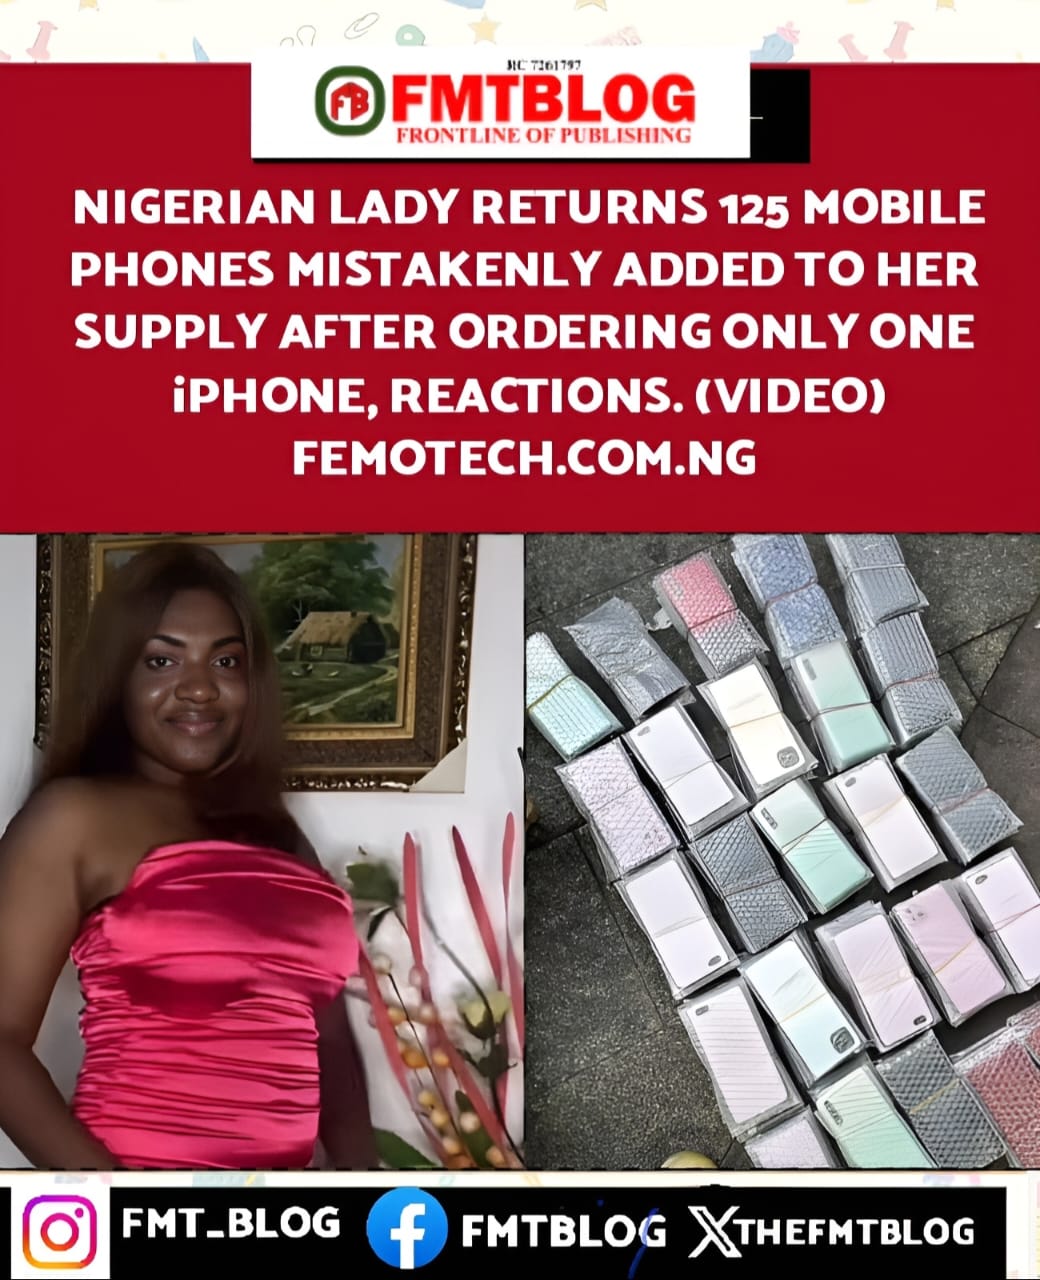 Nigerian Lady Returns 125 Mobile Phones Mistakenly Added To Her Supply After Ordering Only One iPhone, Reactions. (Video)